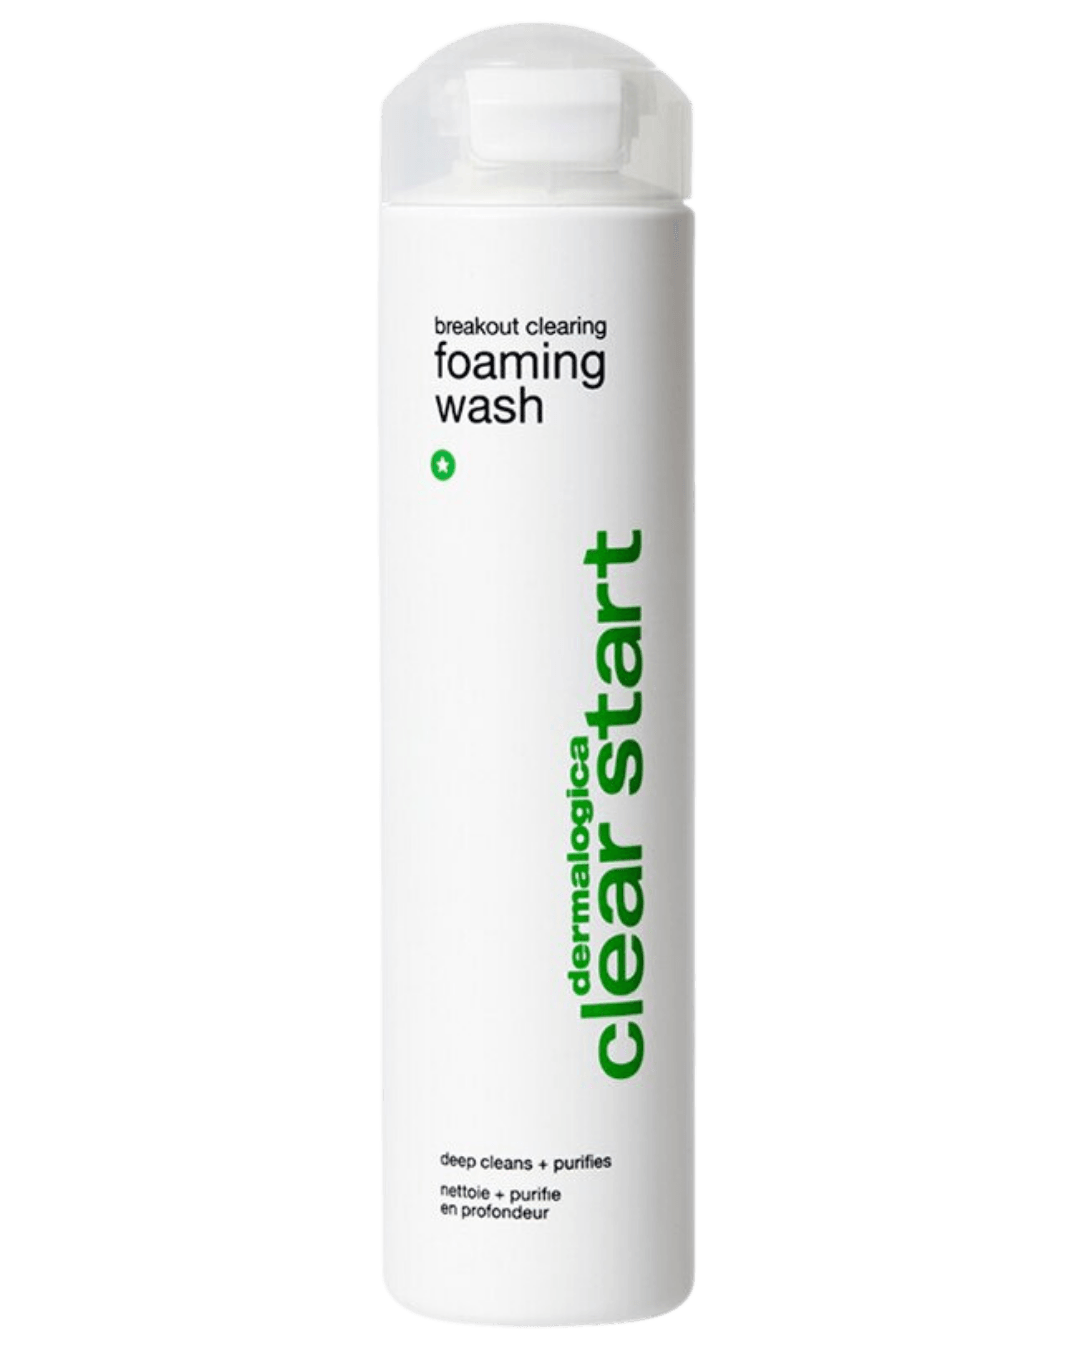 Daily Vanity Beauty Awards 2024 Best Mens care Clear Start by Dermalogica Breakout Clearing Foaming Wash Voted By Beauty Experts